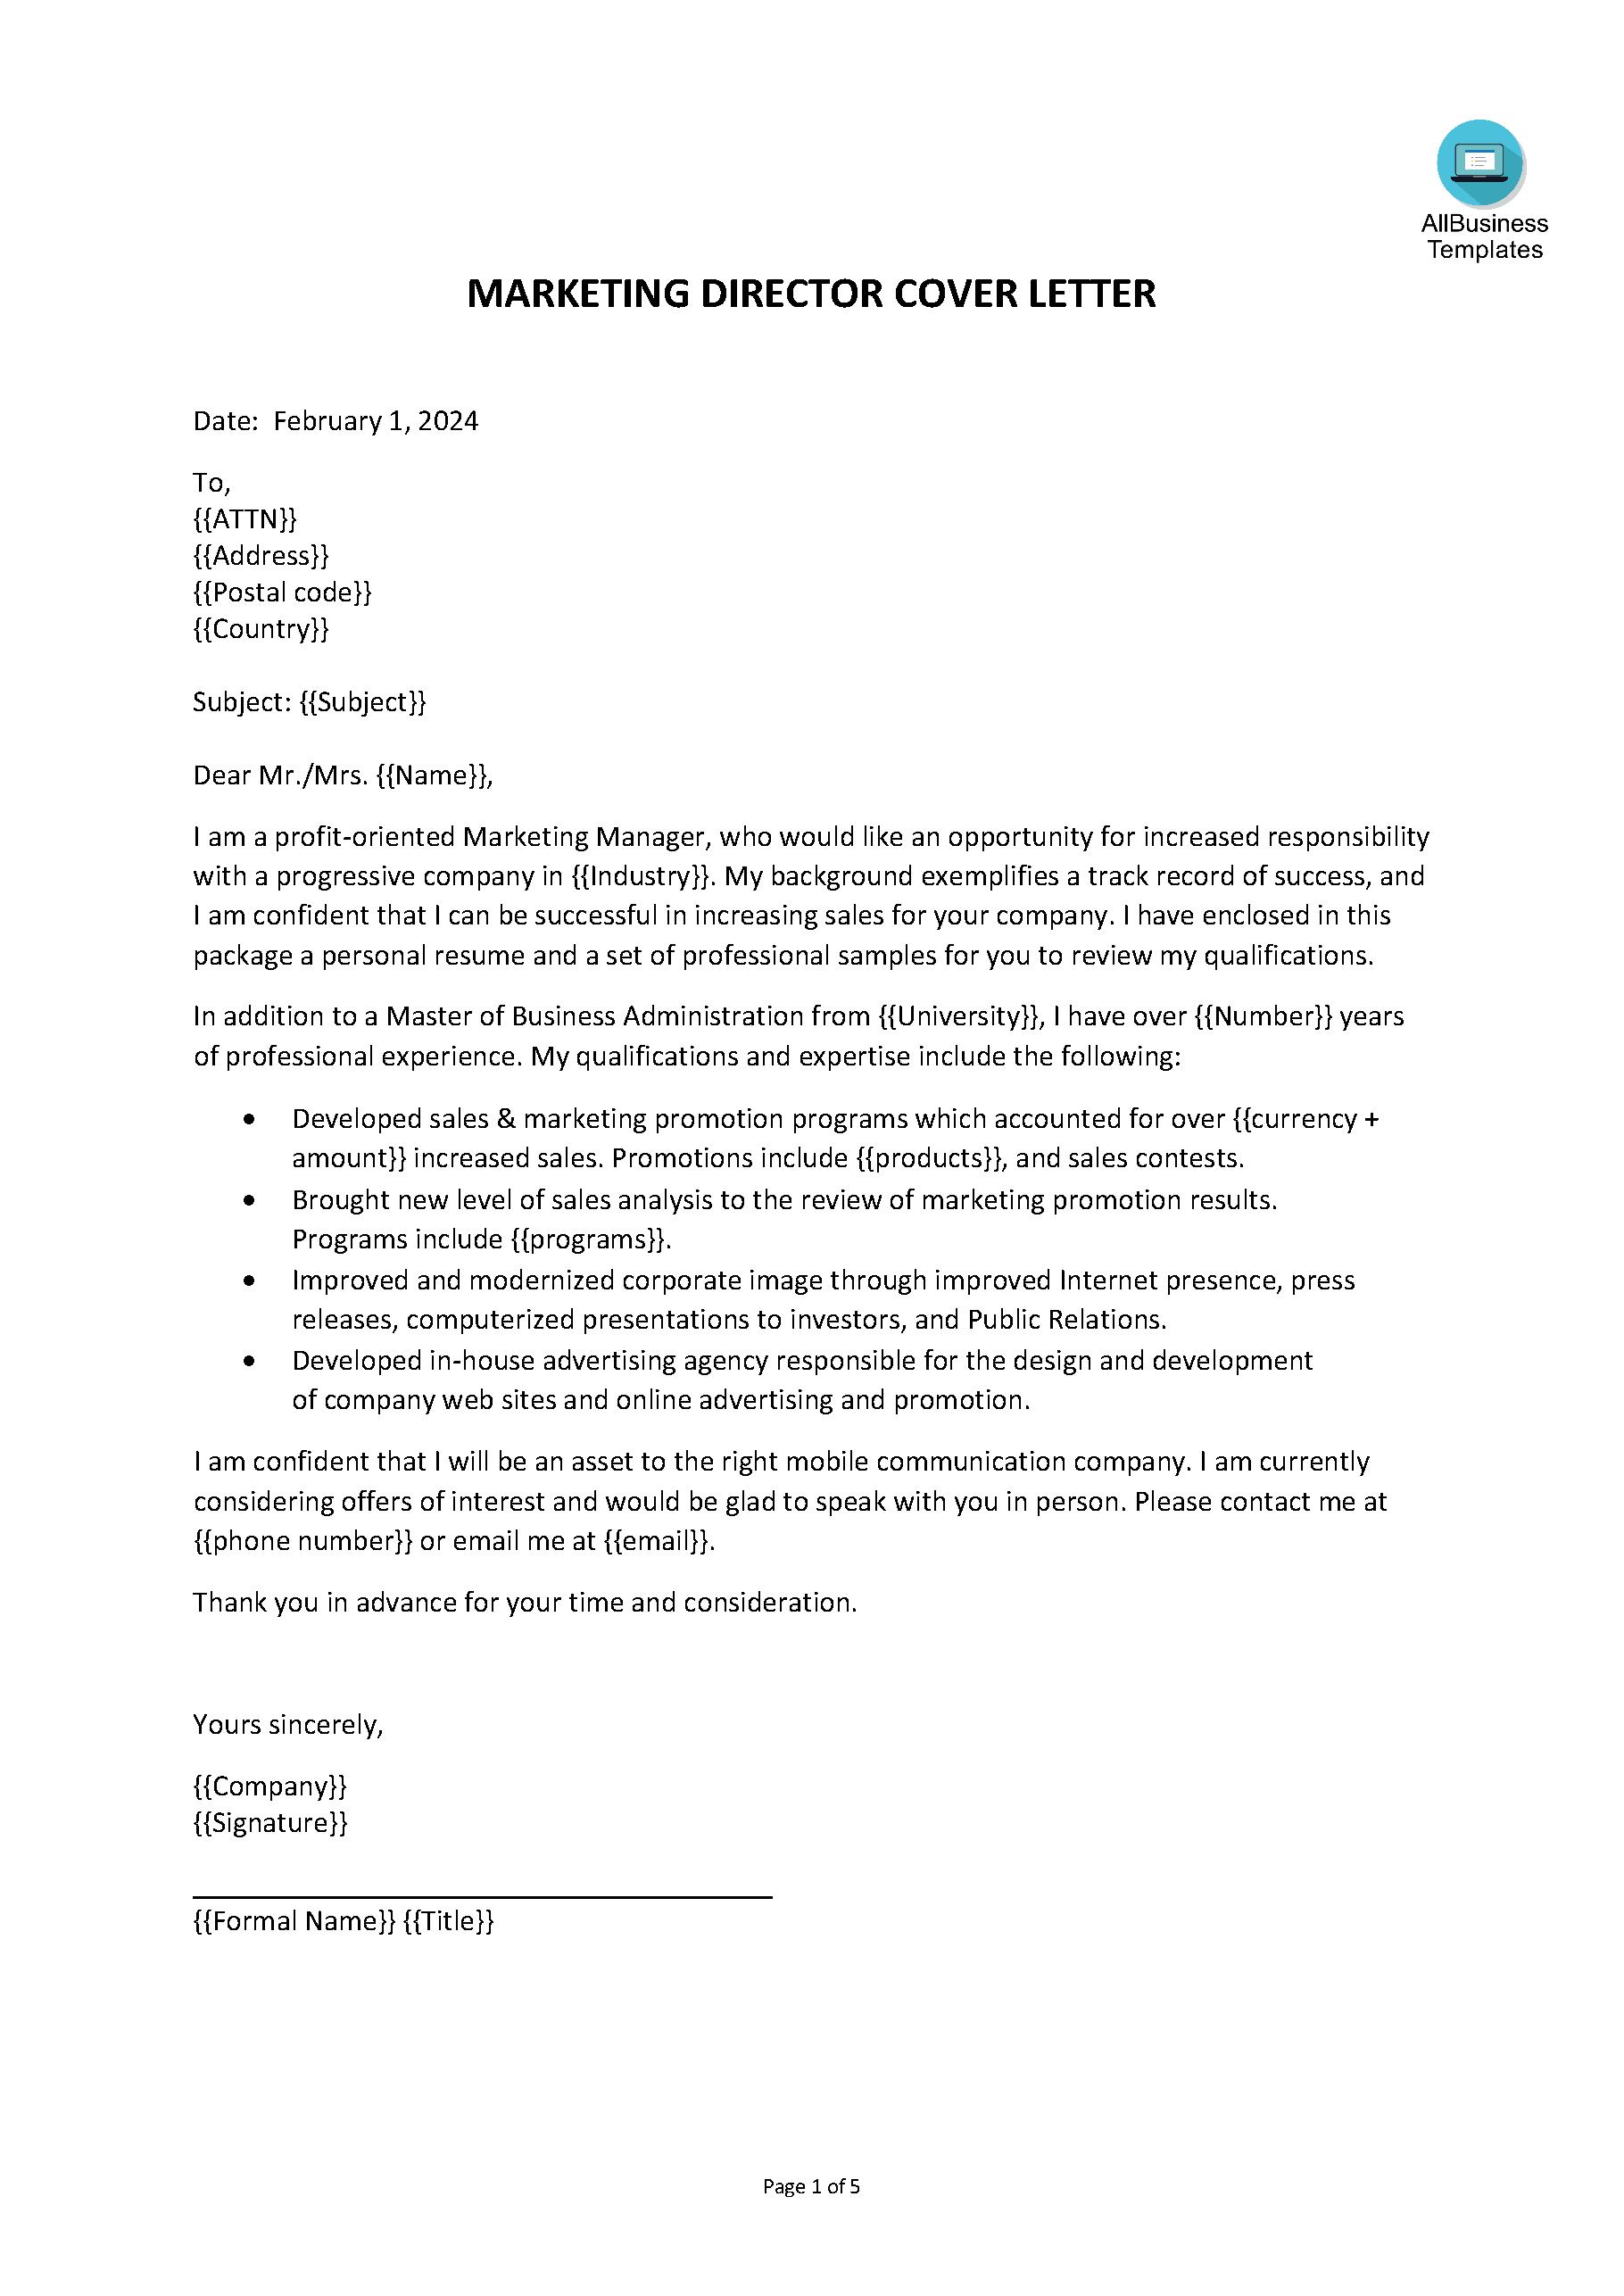 Marketing Manager Cover Letter from www.allbusinesstemplates.com